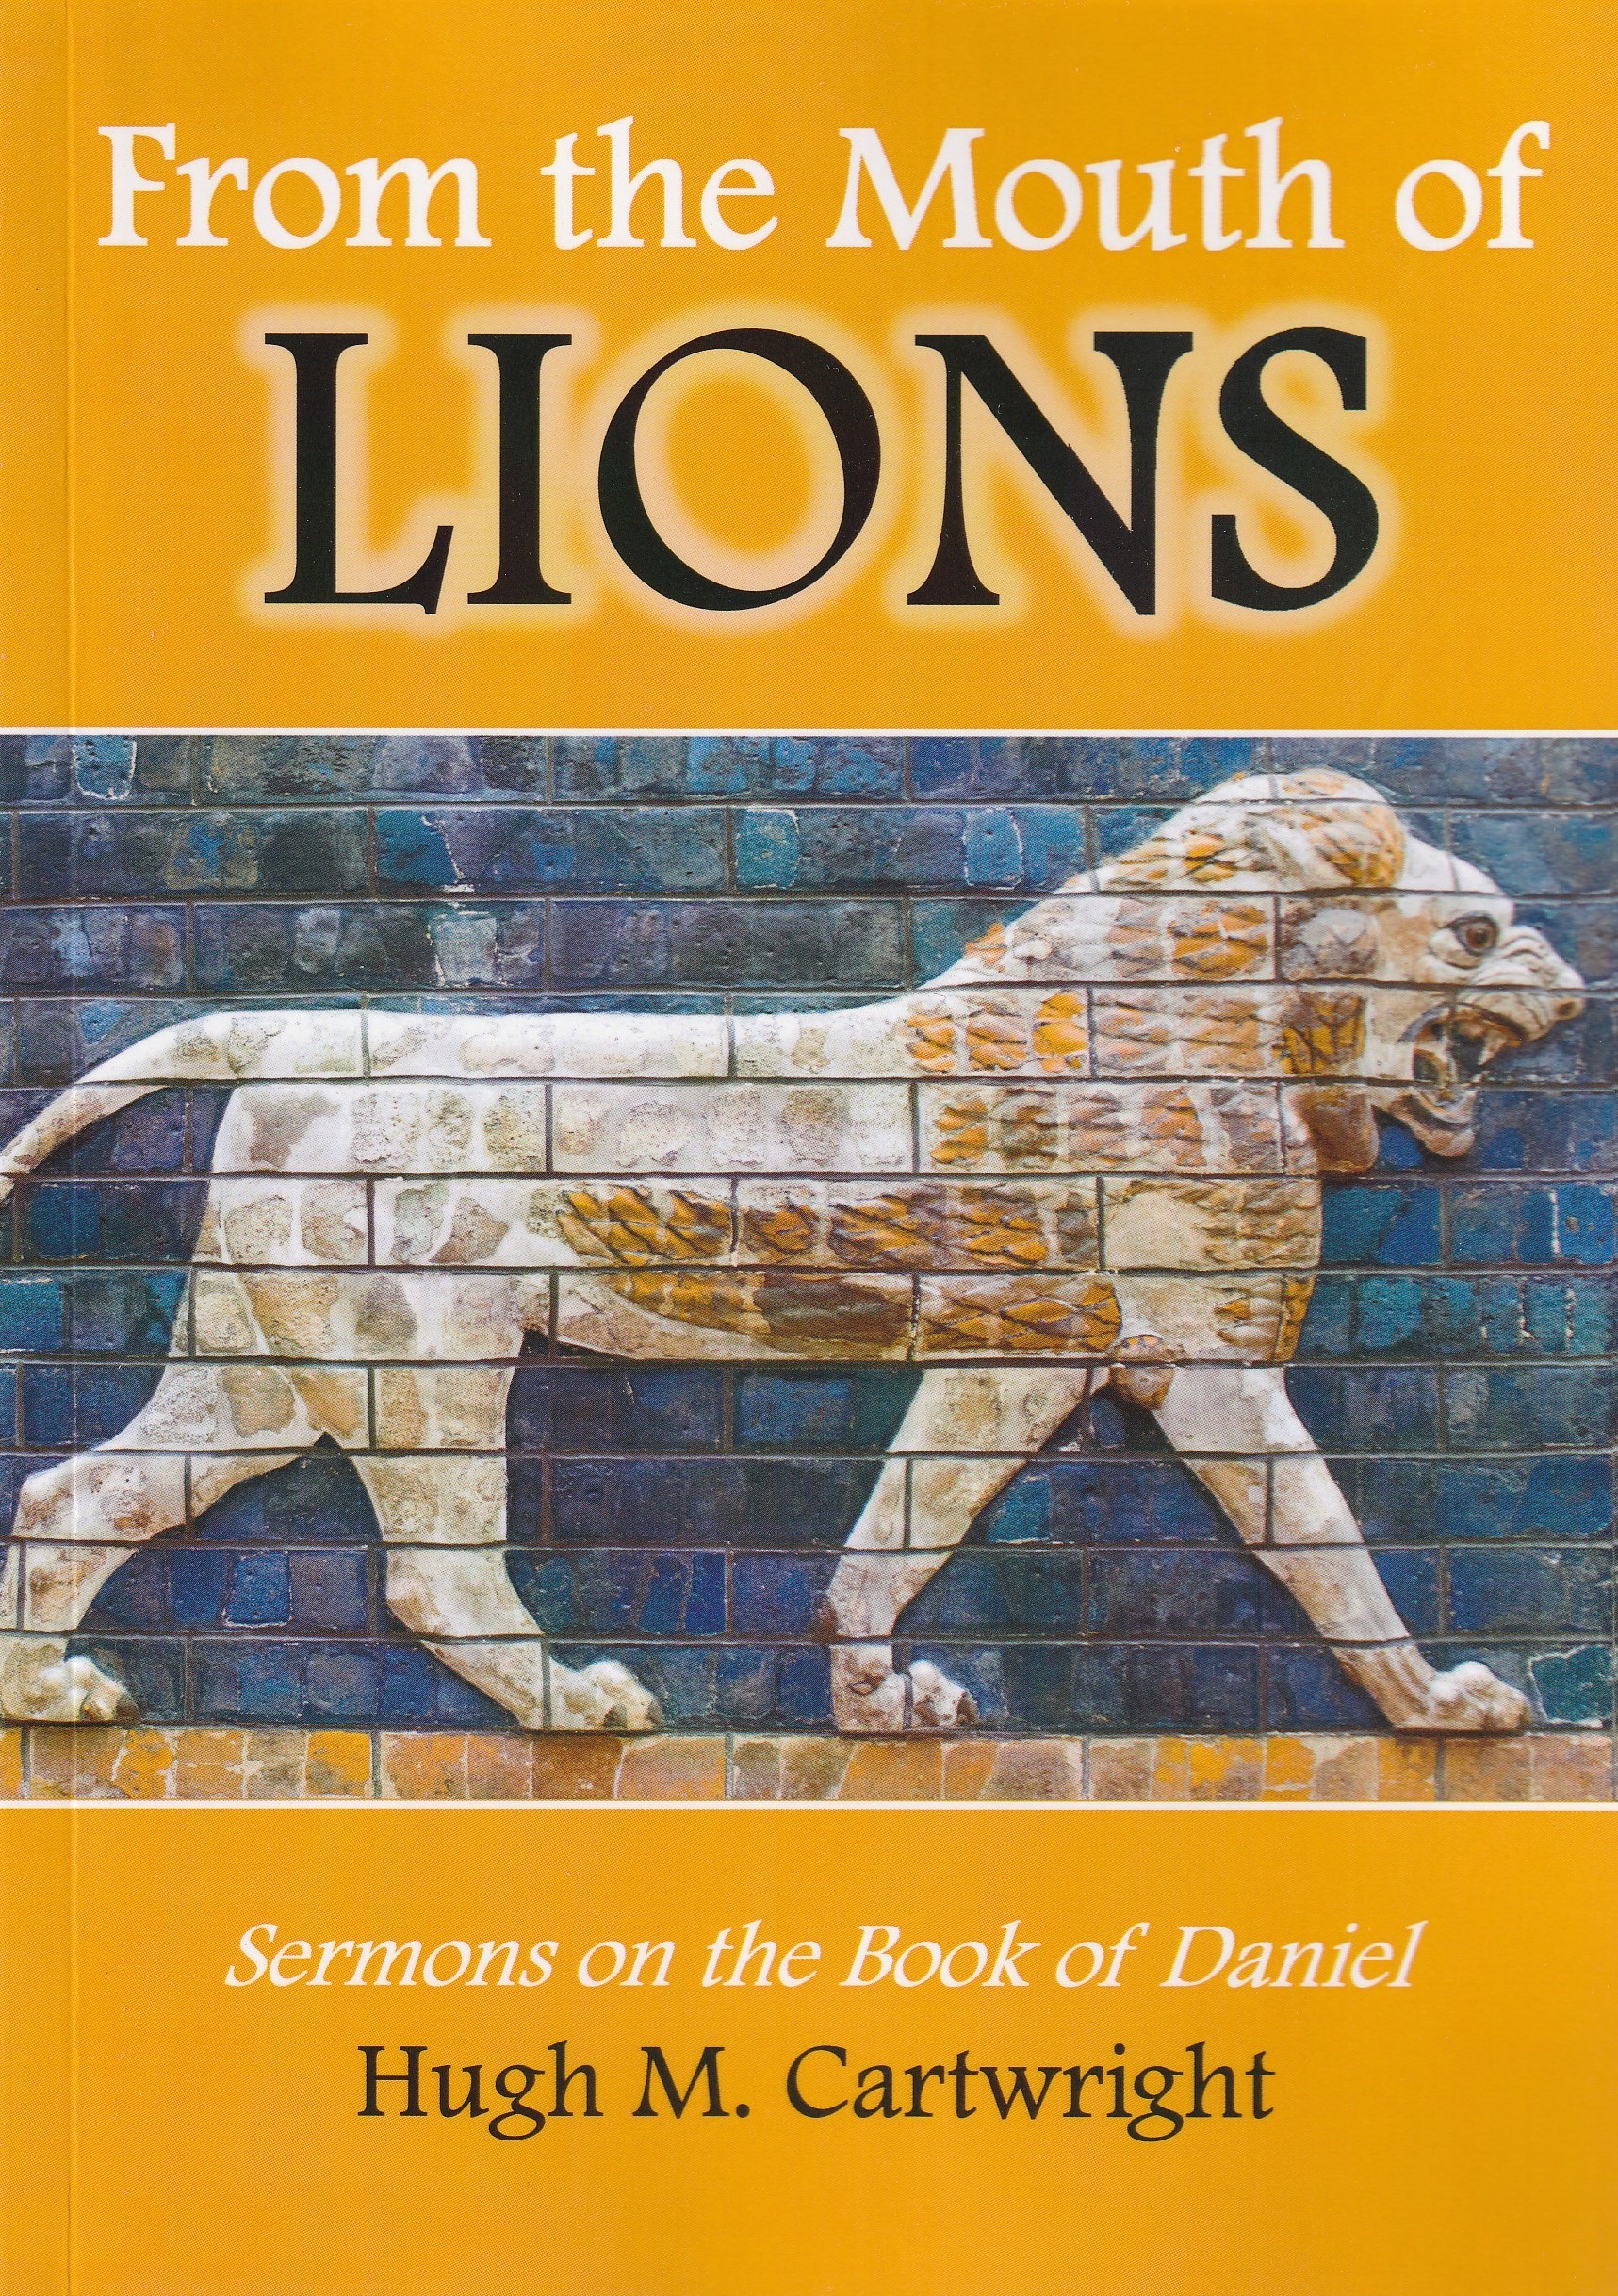 From the Mouth of Lions: Sermons on the Book of Daniel (paperback)